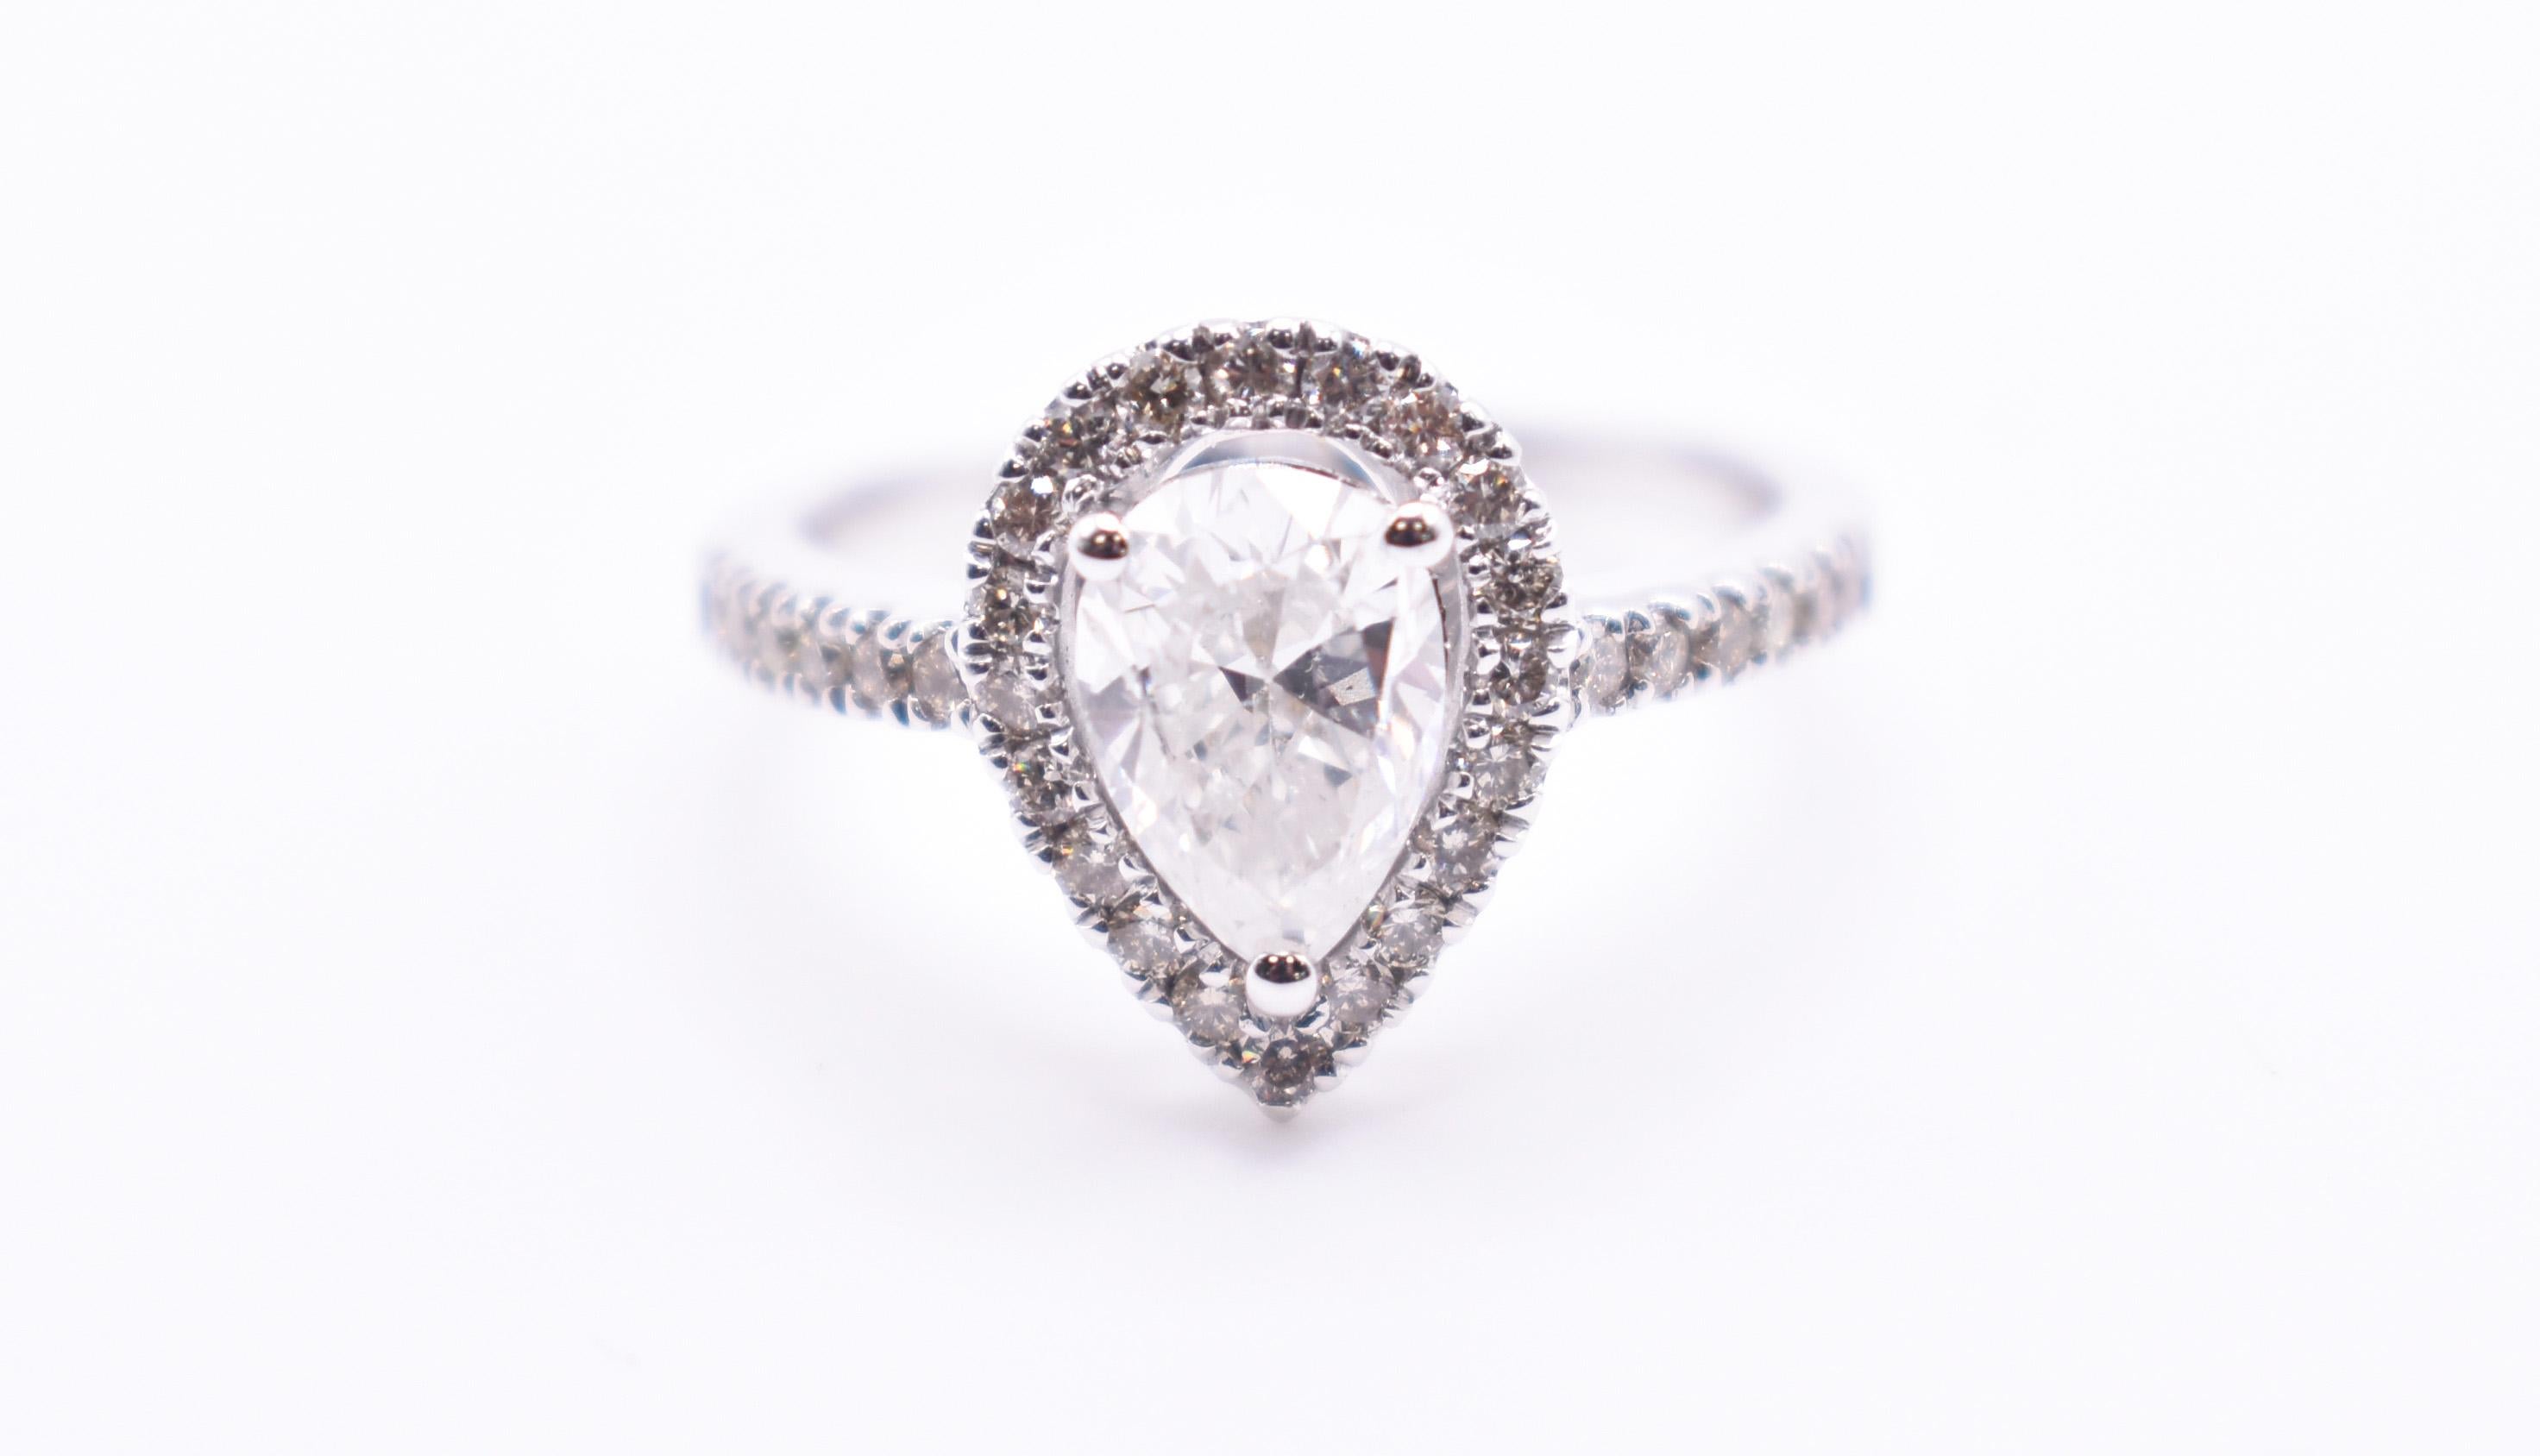 On offer for sale is a superb 18K White Gold 1.18ct pear shaped engagement ring, having a 1.18ct pear shaped diamond to the centre, with a hallo surround and pave sides. 

Metal: 18K White Gold
Total Carat Weight: 1.58ct
Colour: F
Clarity: I2
Size: